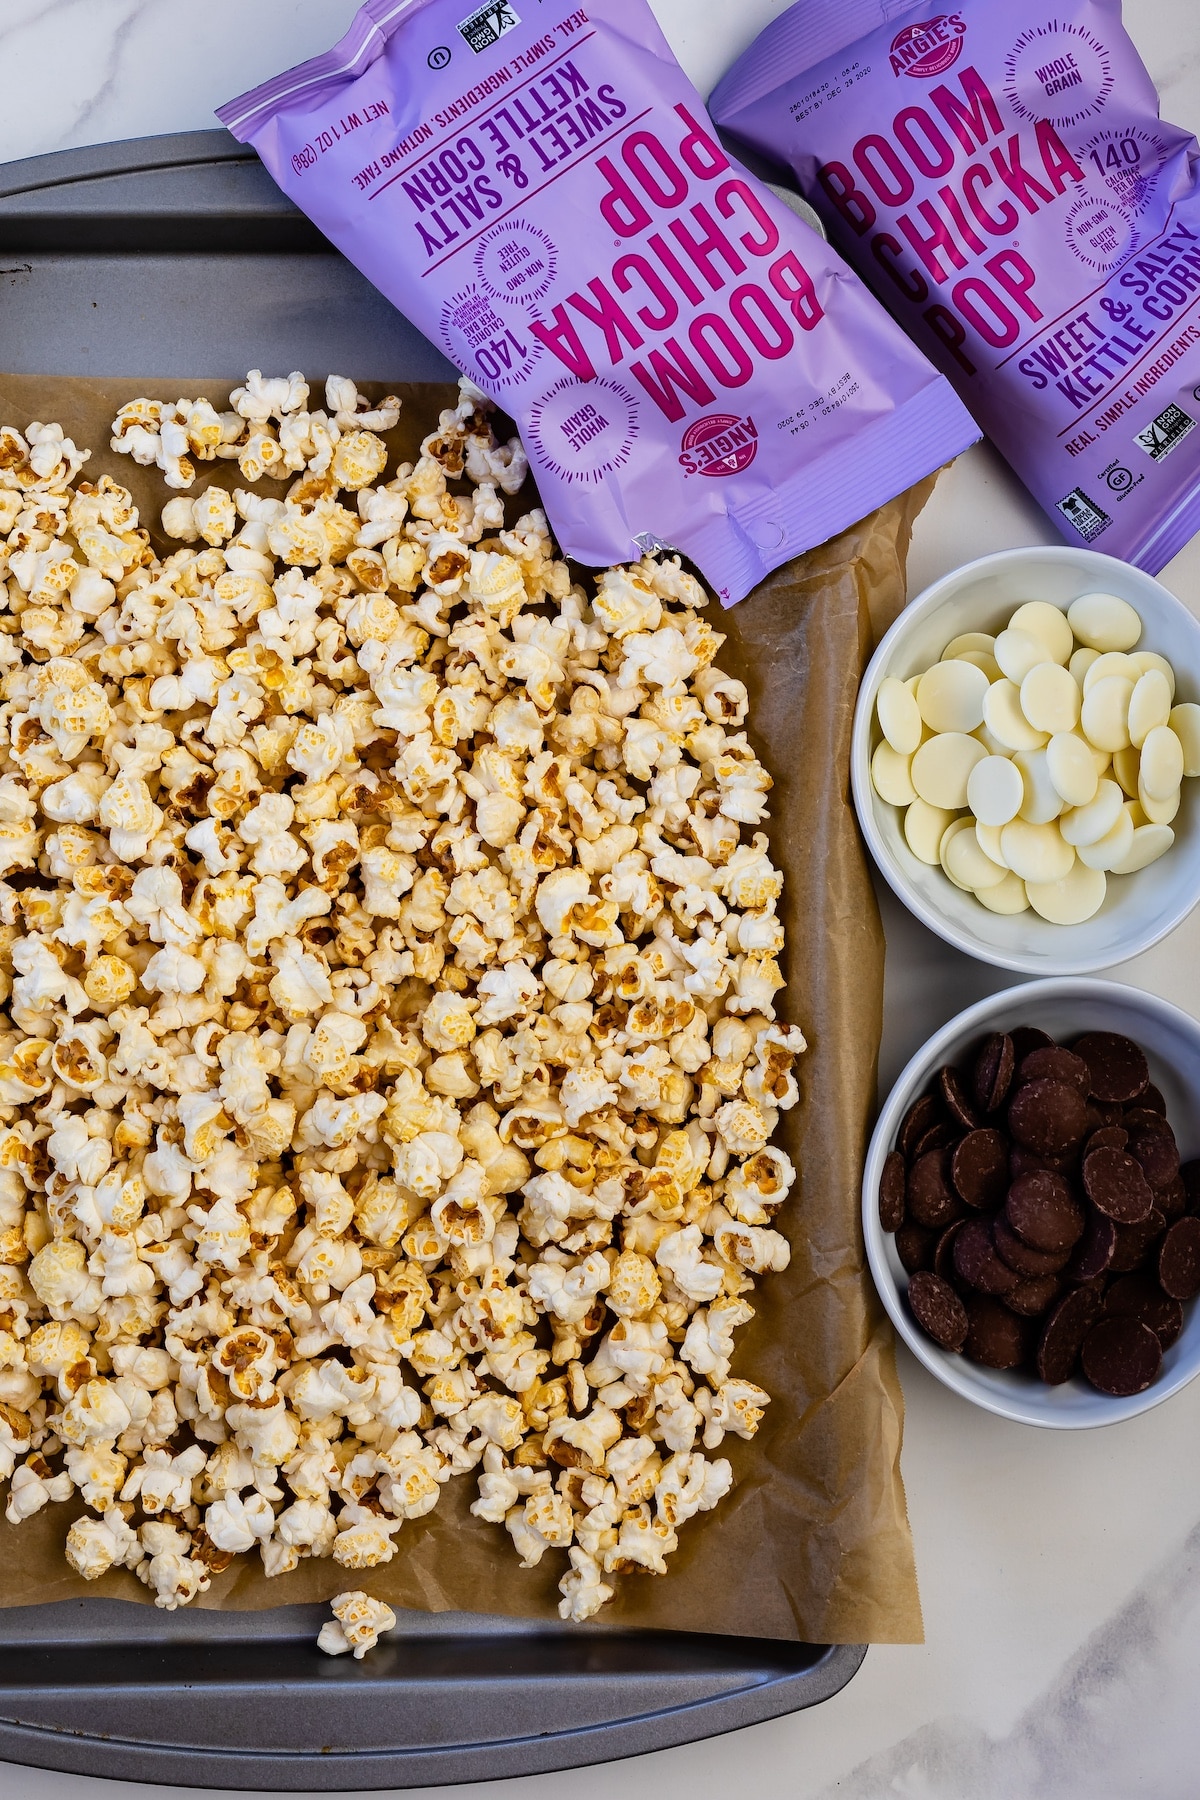 popcorn on a baking sheet next to popcorn bags and chocolate melts.